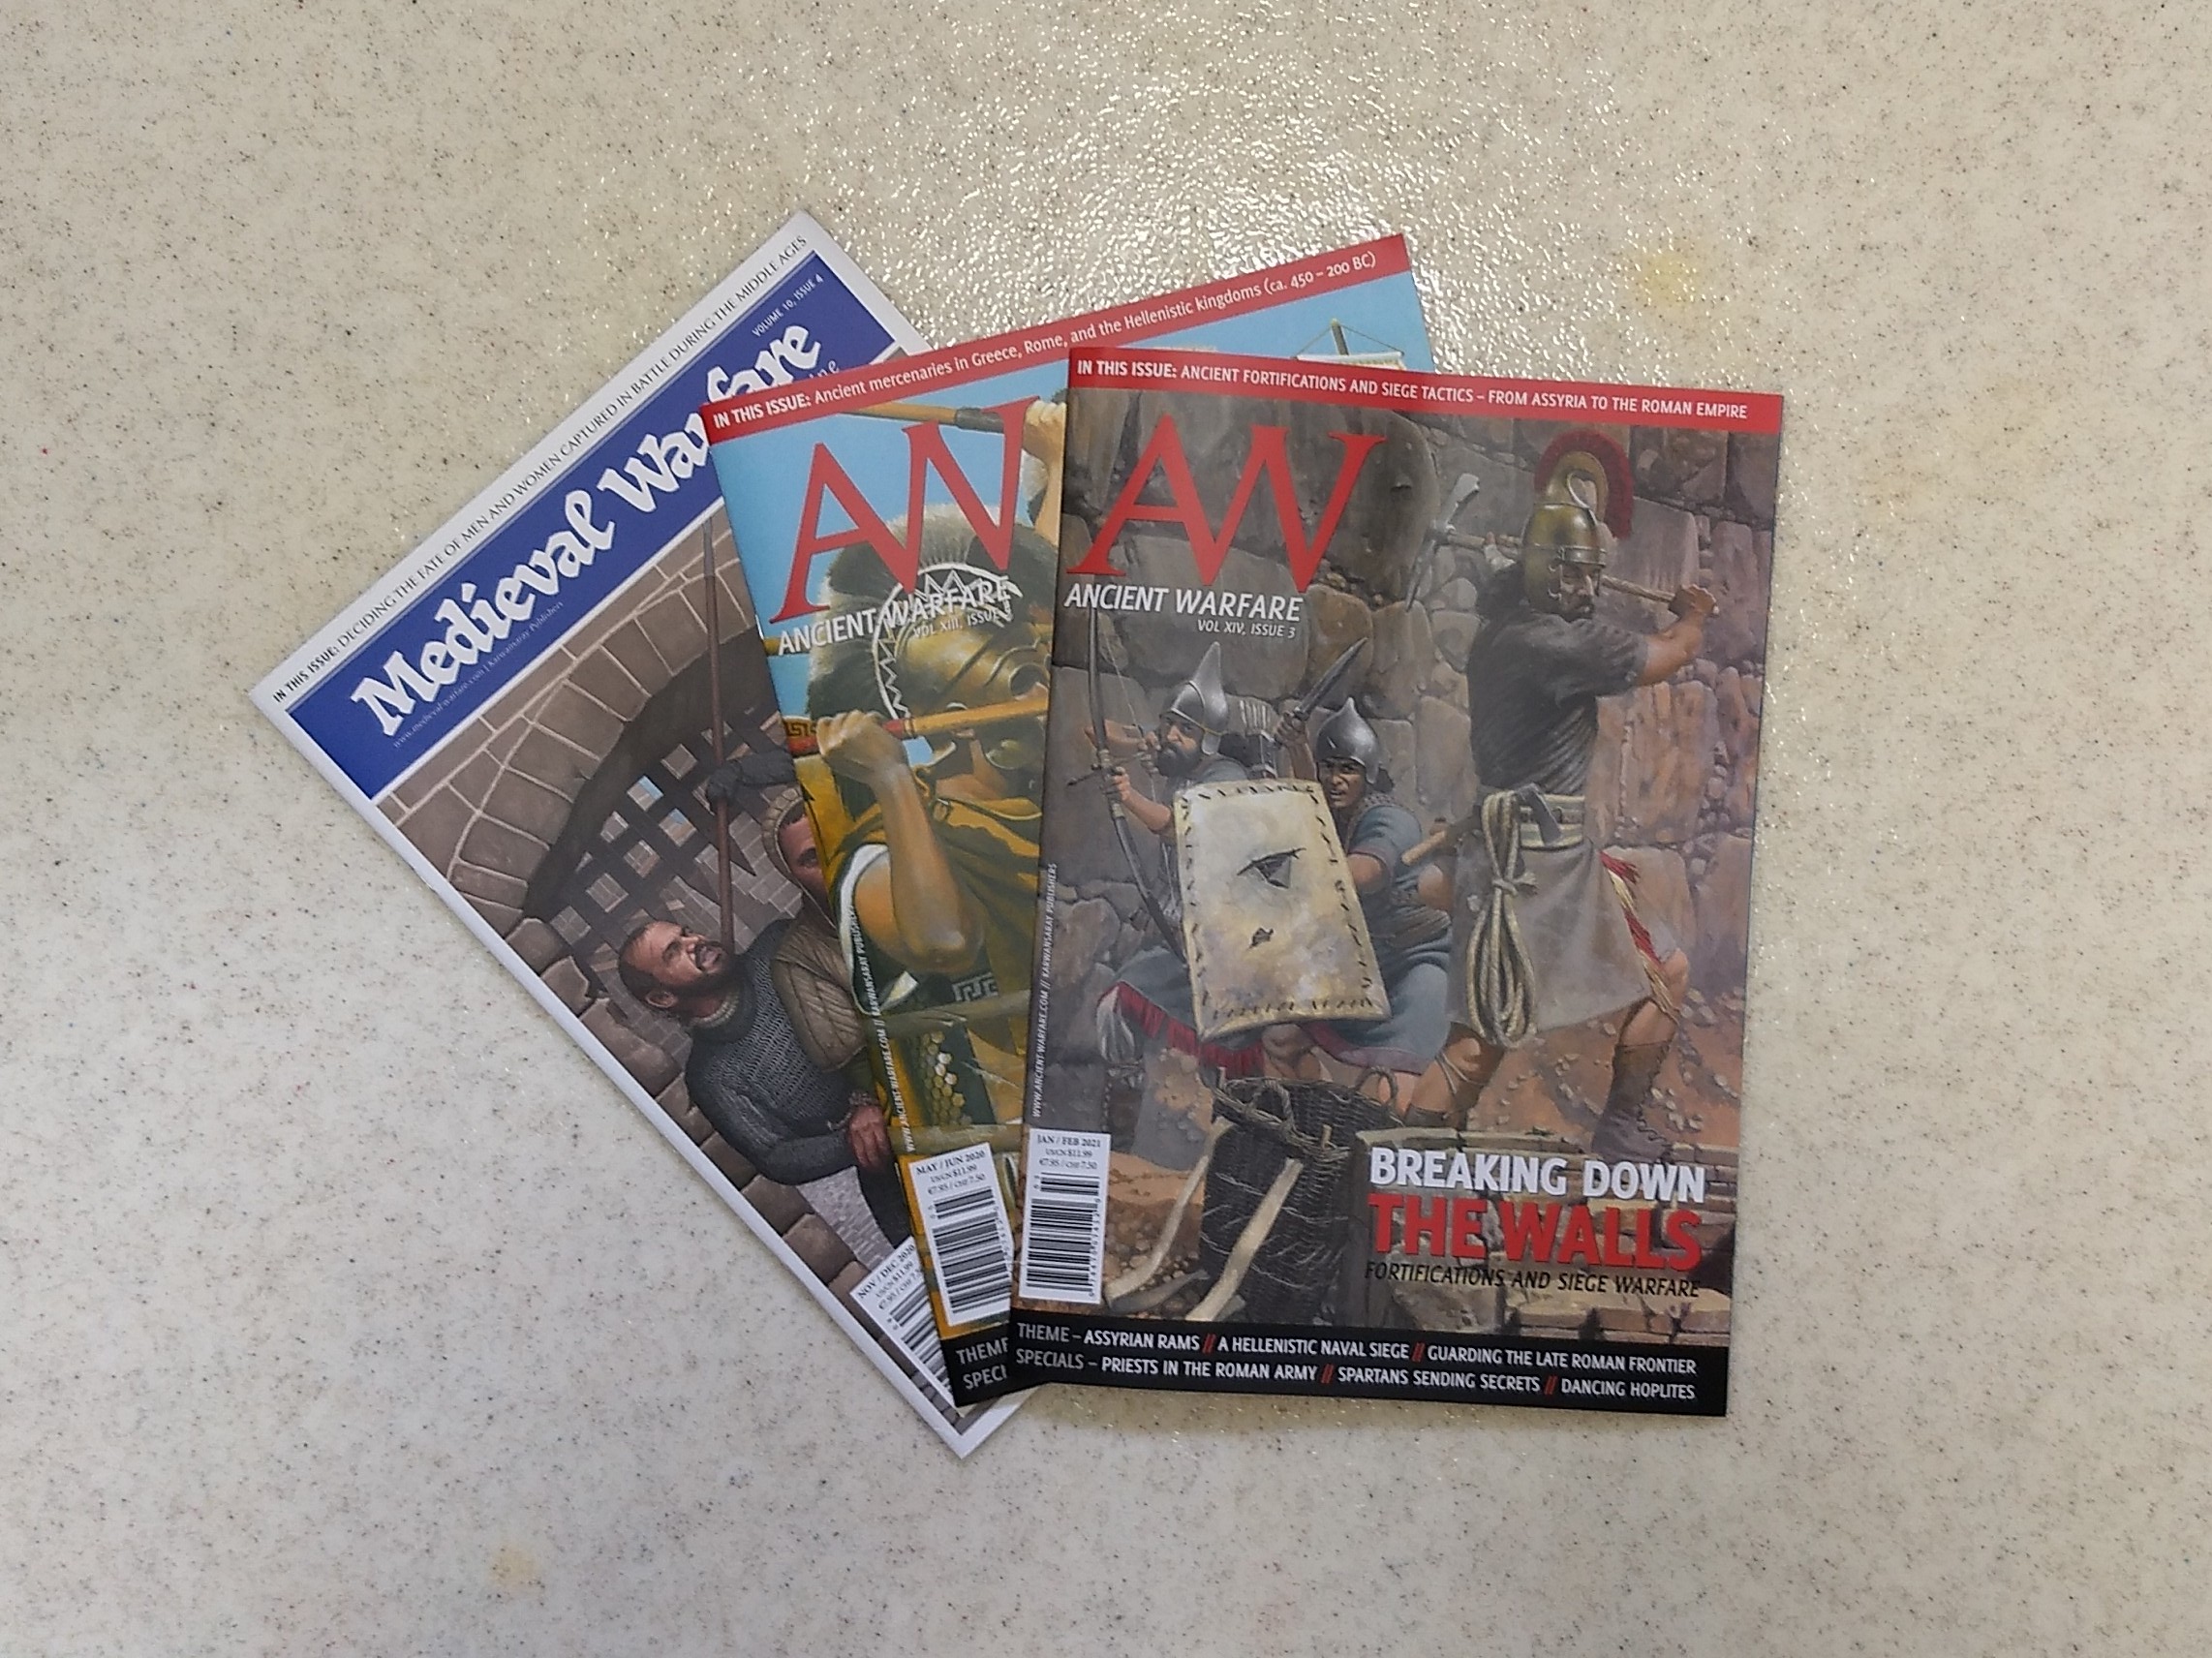 three issues of Ancient Warfare and Medieval Warfare magazine spread out on a textured linoleum surface